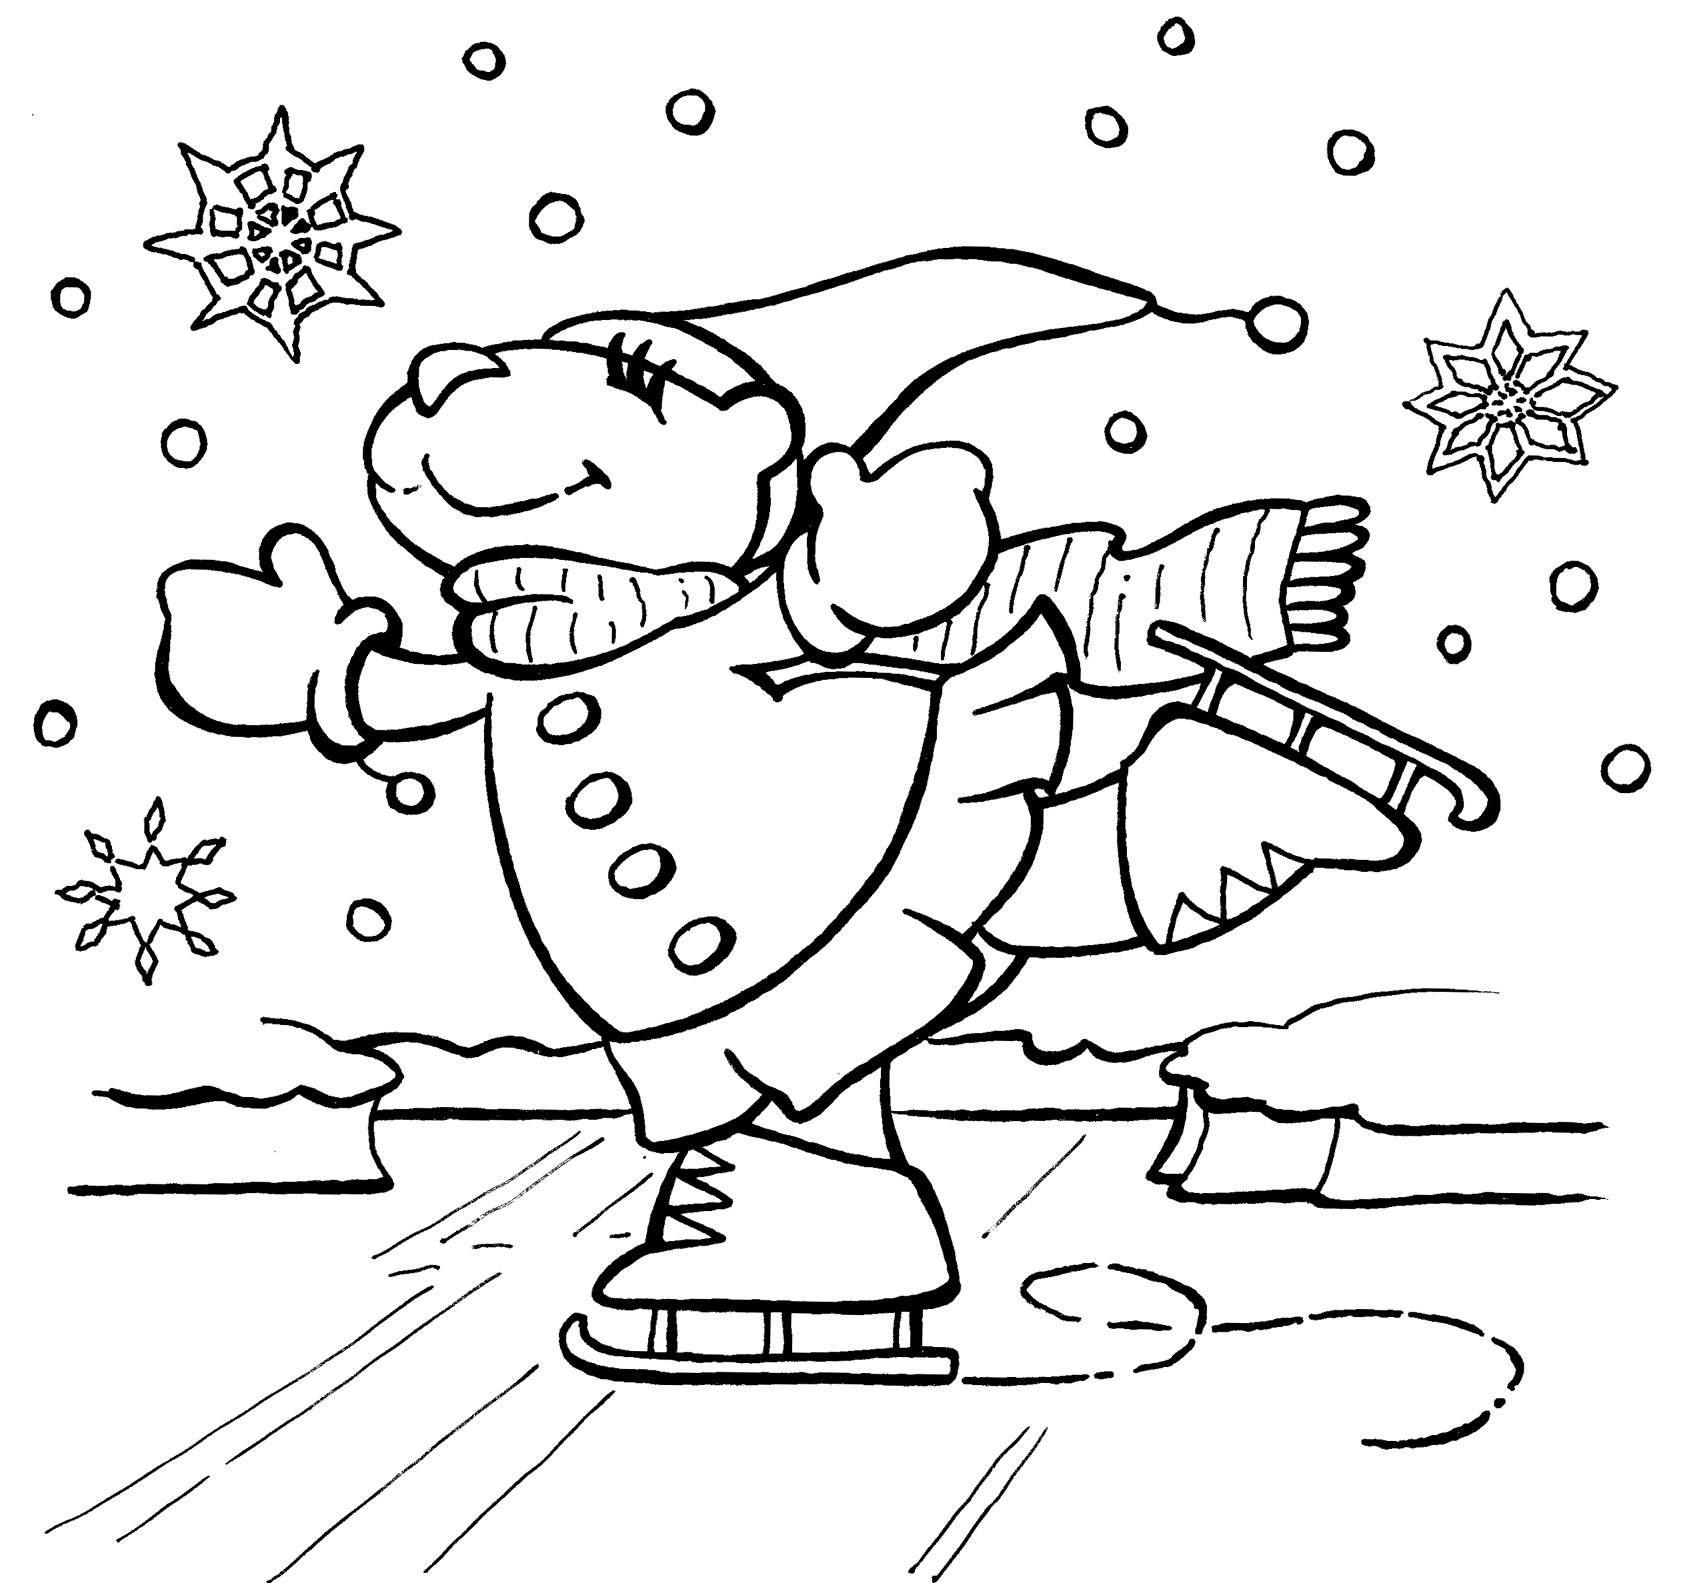 Printable Winter Coloring Pages   ColoringMe.com